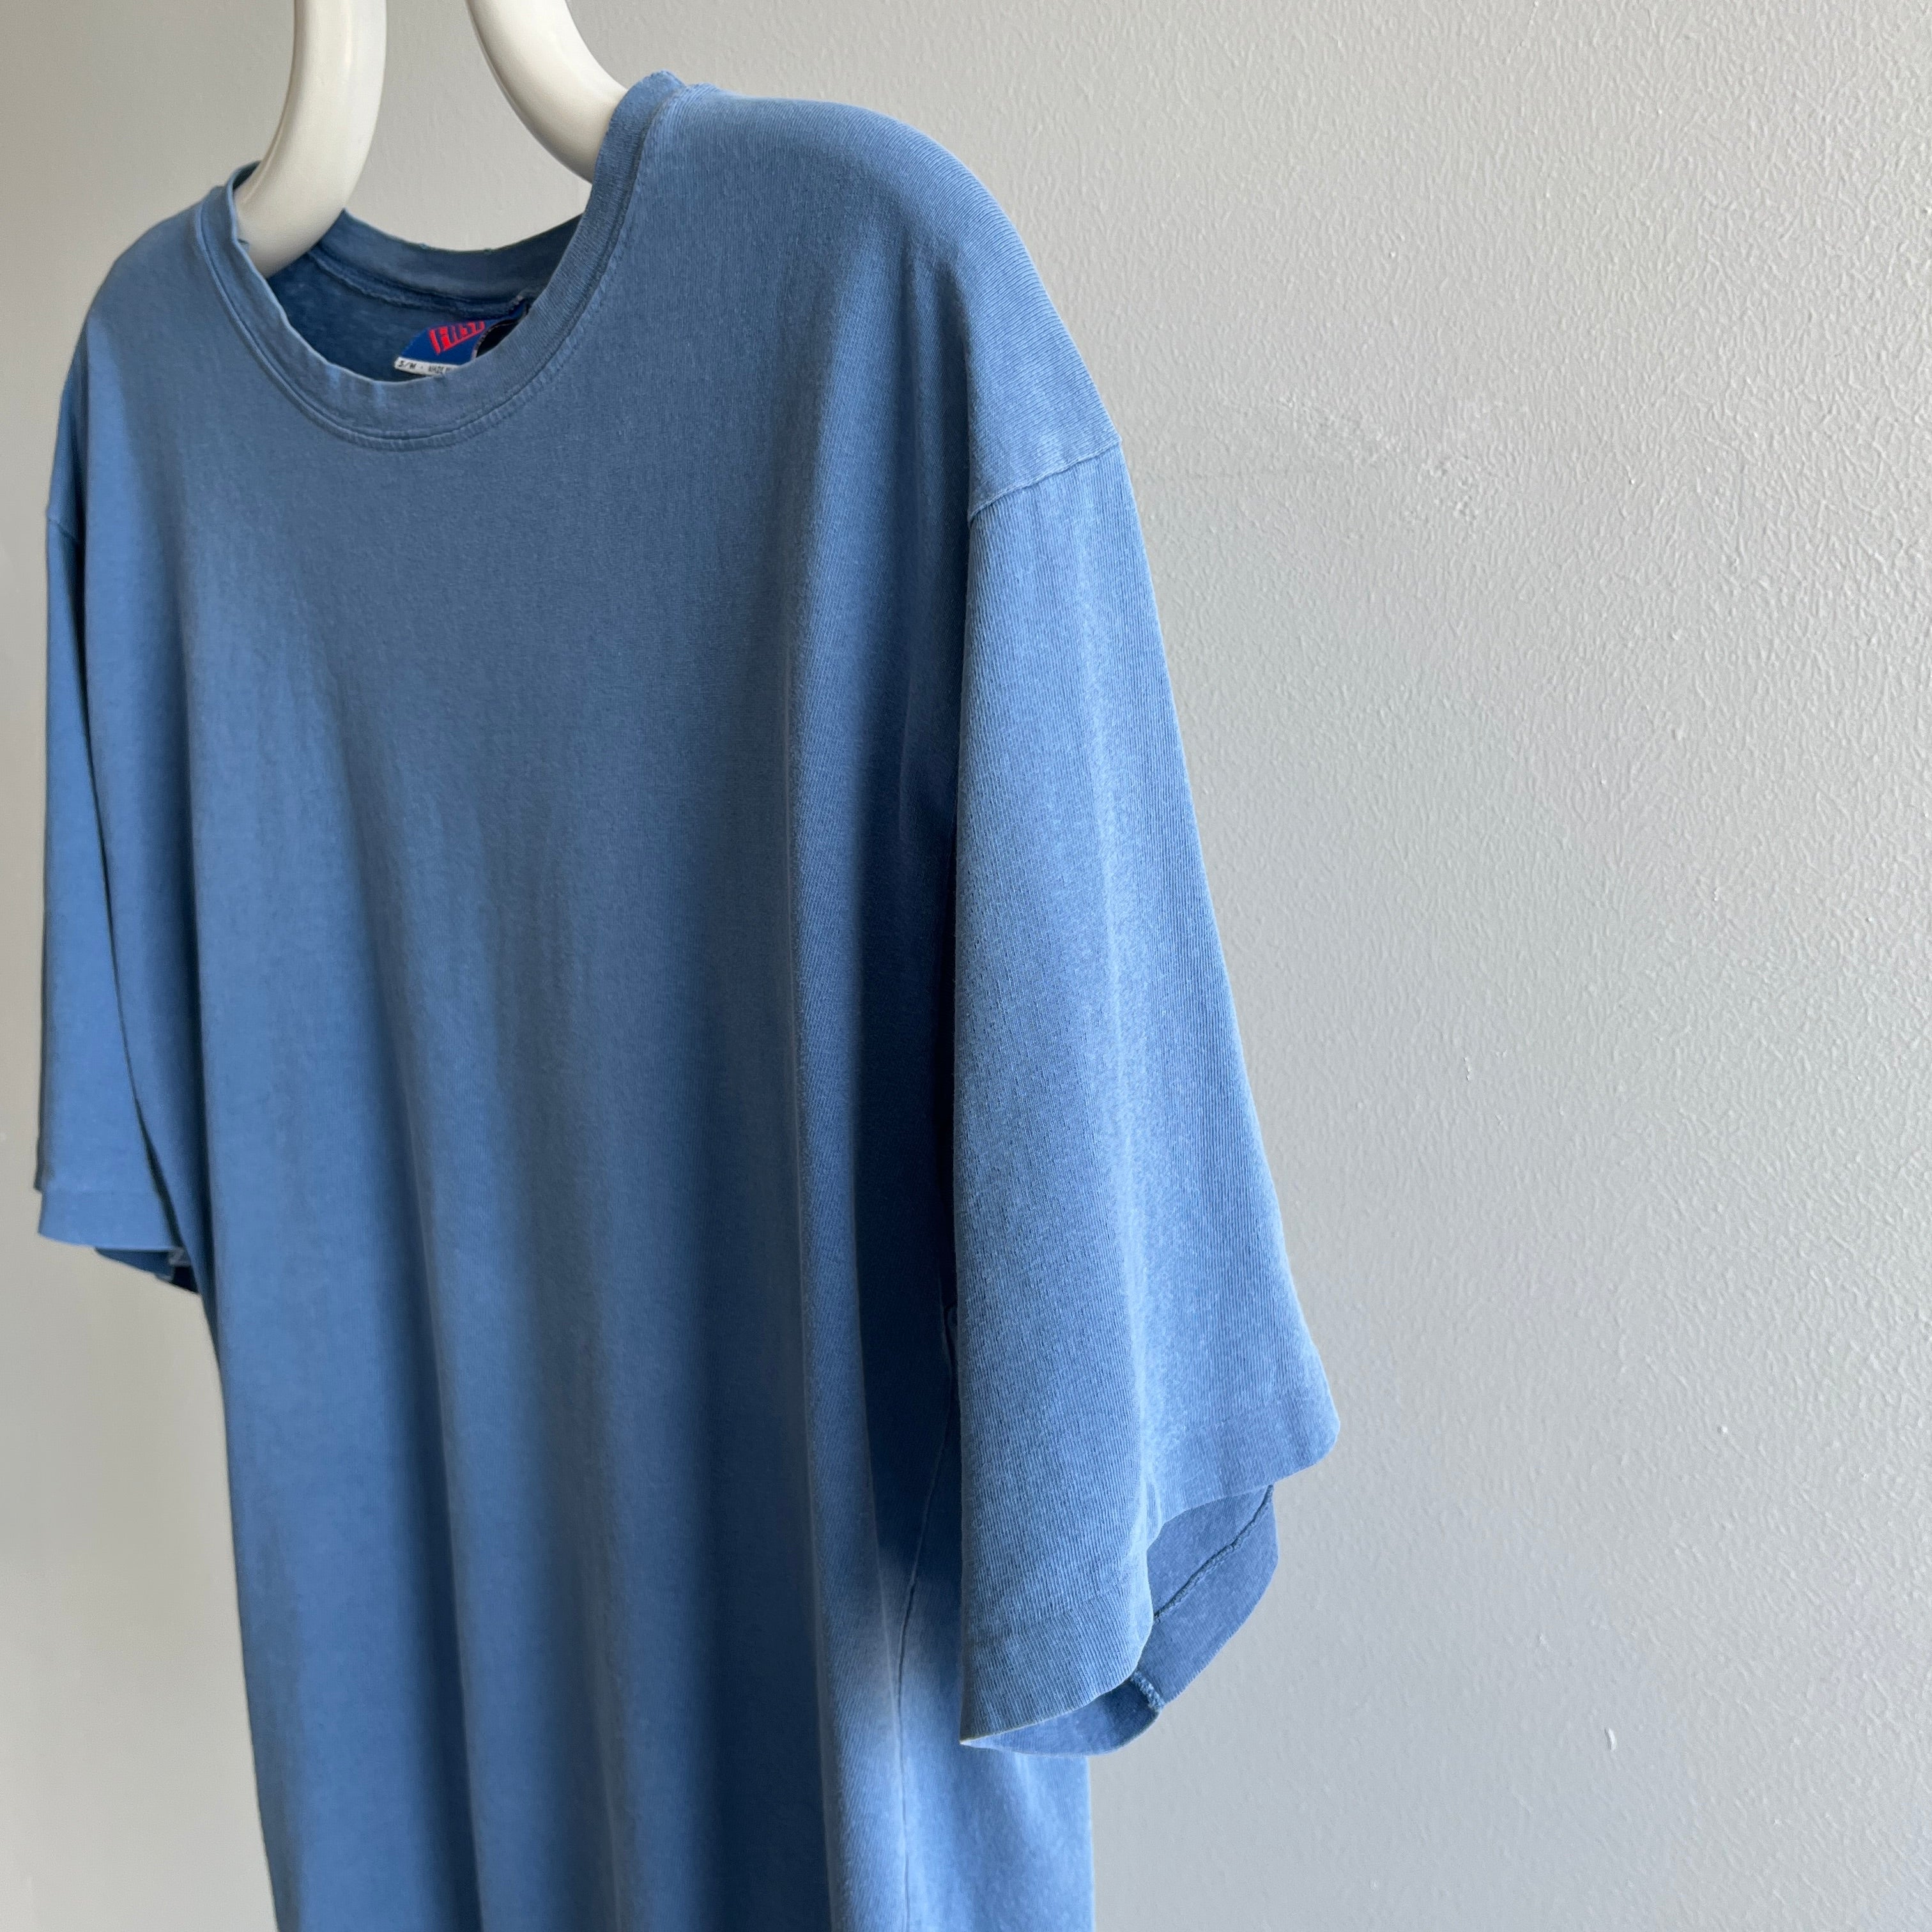 1990s Dusty Blue Cotton T-Shirt with Larger Short Sleeves